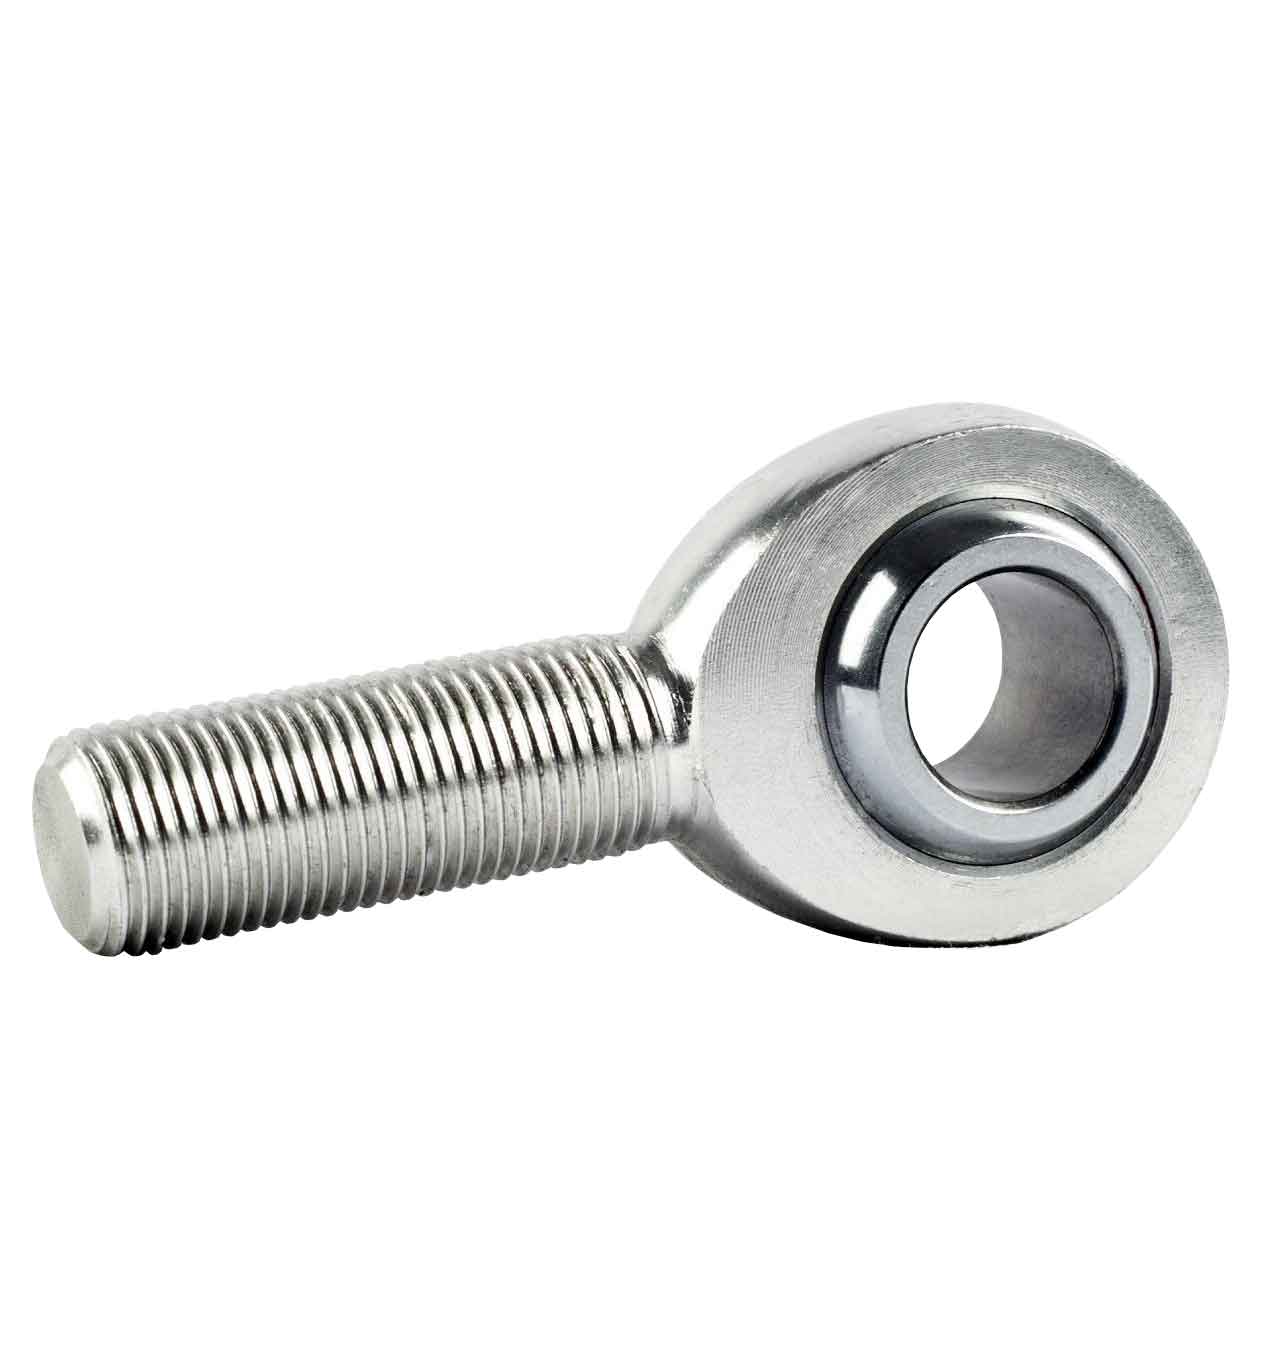 SS-POS8 GENERIC 8mm M8X1.25 STAINLESS STEEL MALE ROD END BEARING Thumbnail